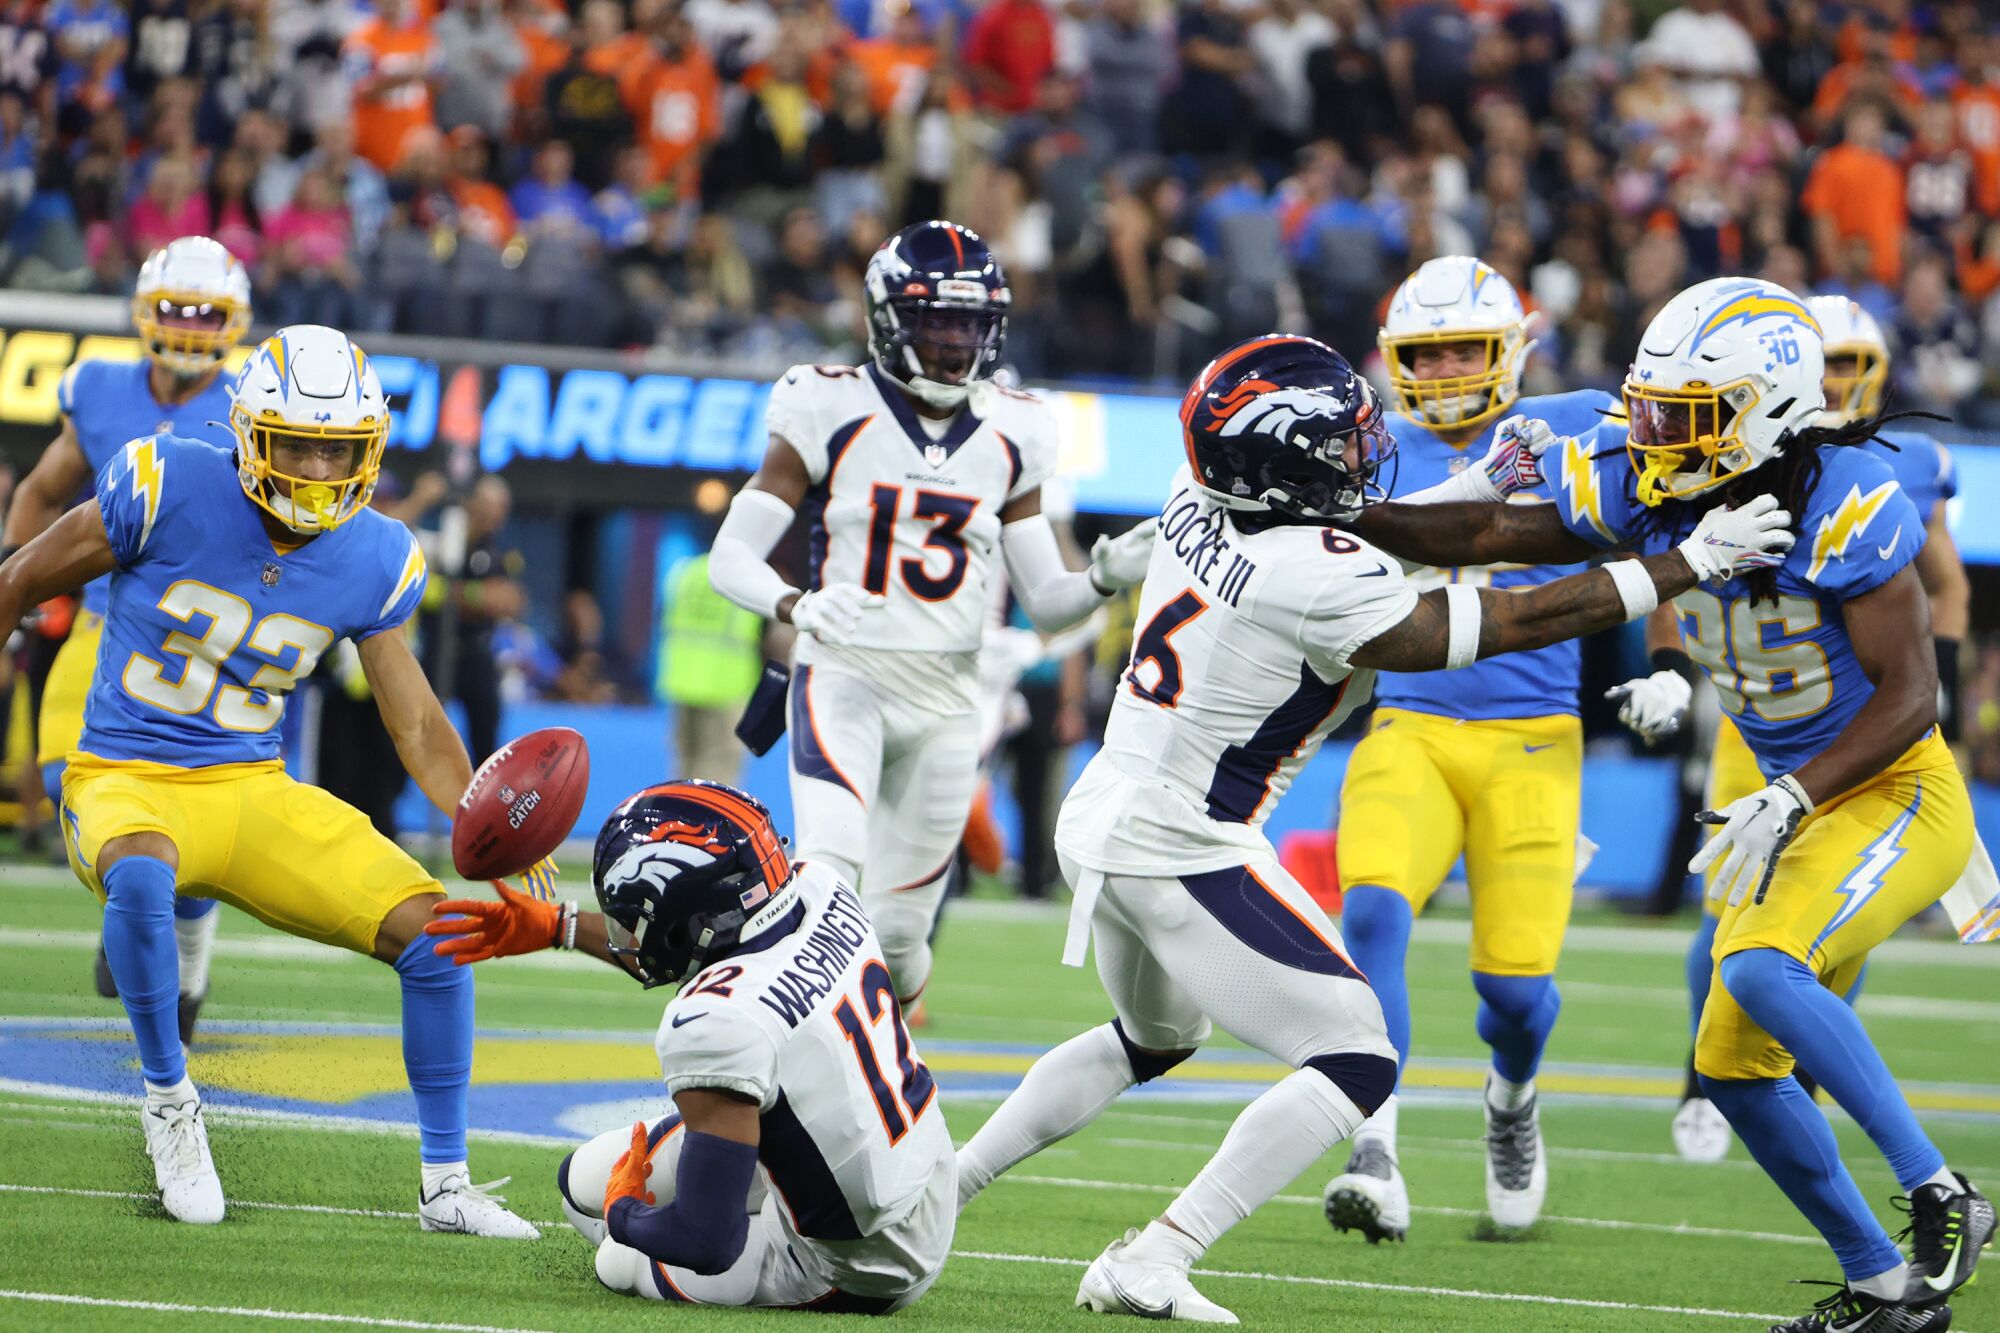 Broncos wide receiver Montrell Washington fumbles a punt as Chargers cornerback Deane Leonard closes in to recover.